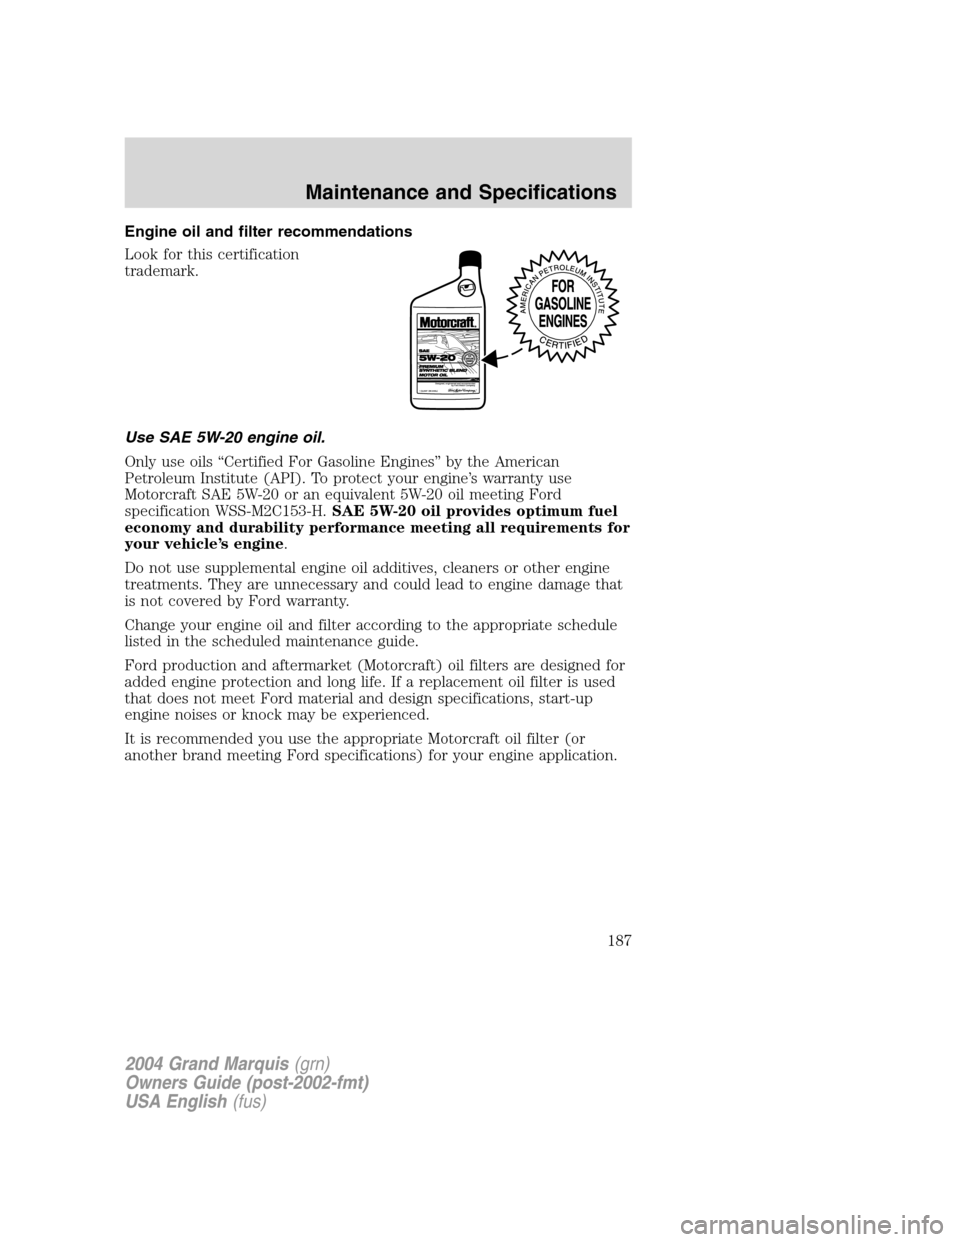 Mercury Grand Marquis 2004  s Owners Guide Engine oil and filter recommendations
Look for this certification
trademark.
Use SAE 5W-20 engine oil.
Only use oils“Certified For Gasoline Engines”by the American
Petroleum Institute (API). To pr